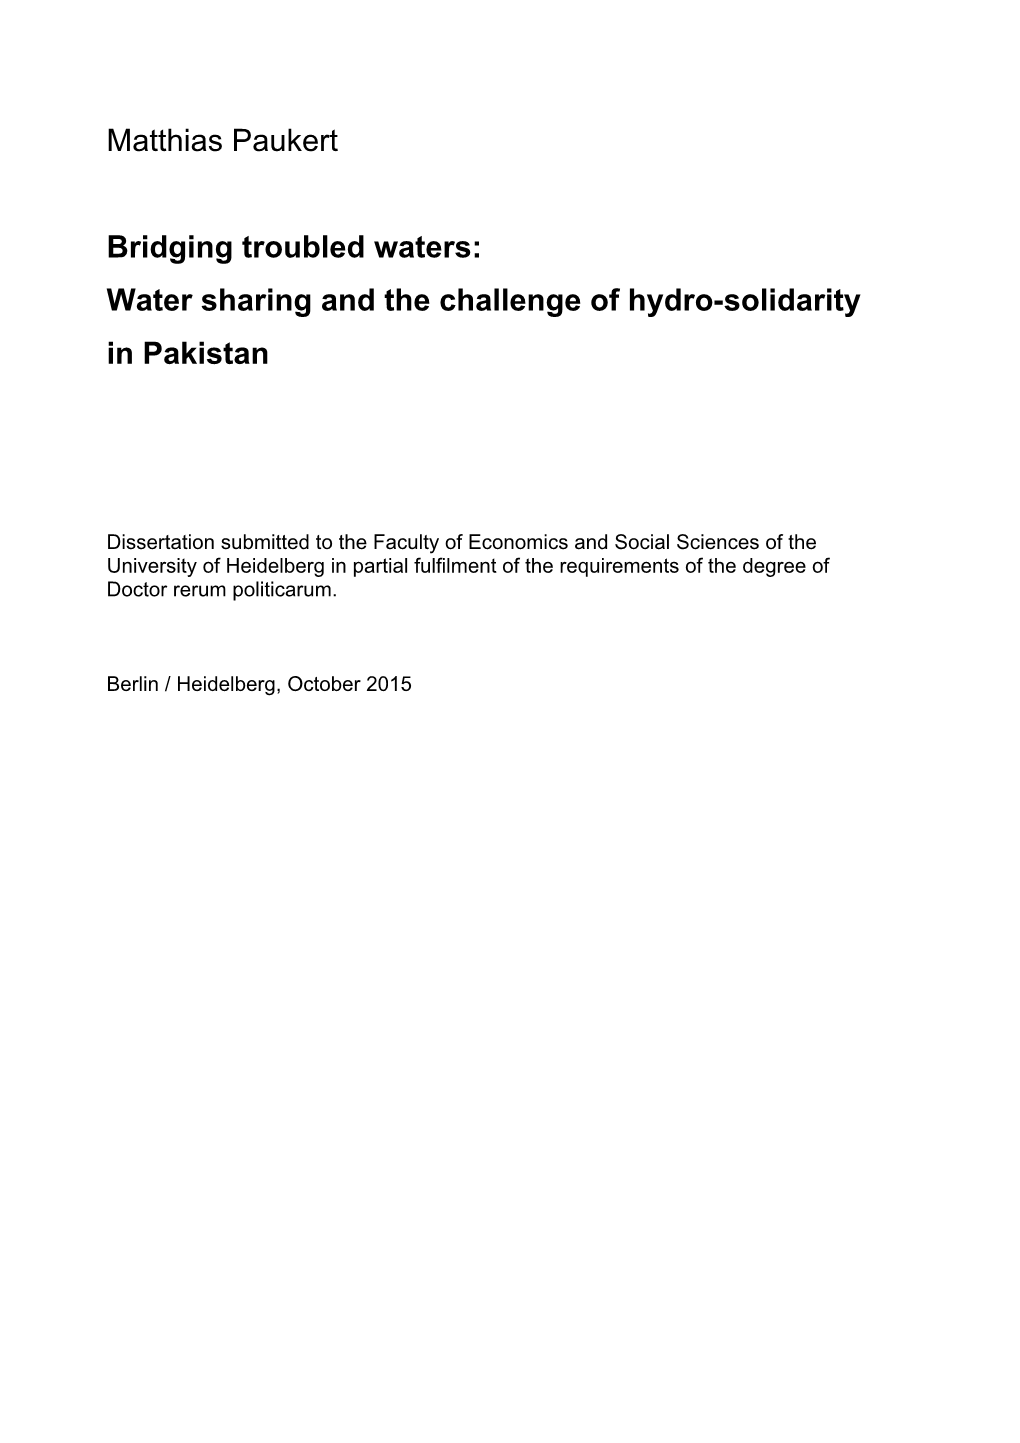 Water Sharing and the Challenge of Hydro-Solidarity in Pakistan